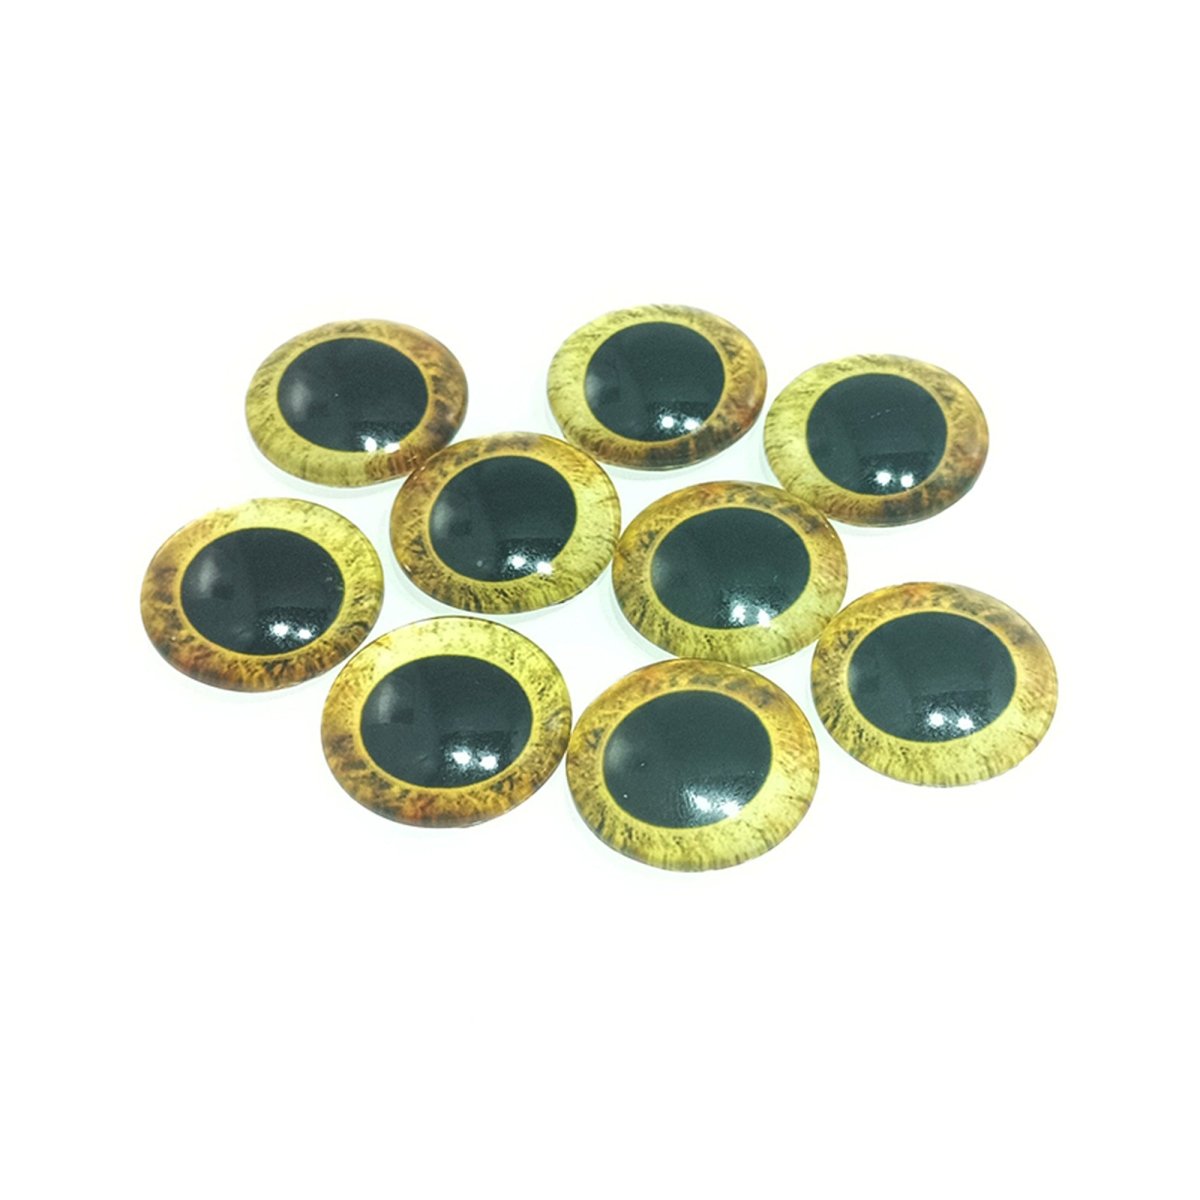 10-40pcs 20mm Doll Owl Animal Glass Eyes Large Pupils Glass Cabochon - 10 - Yellow Brown - Asia Sell